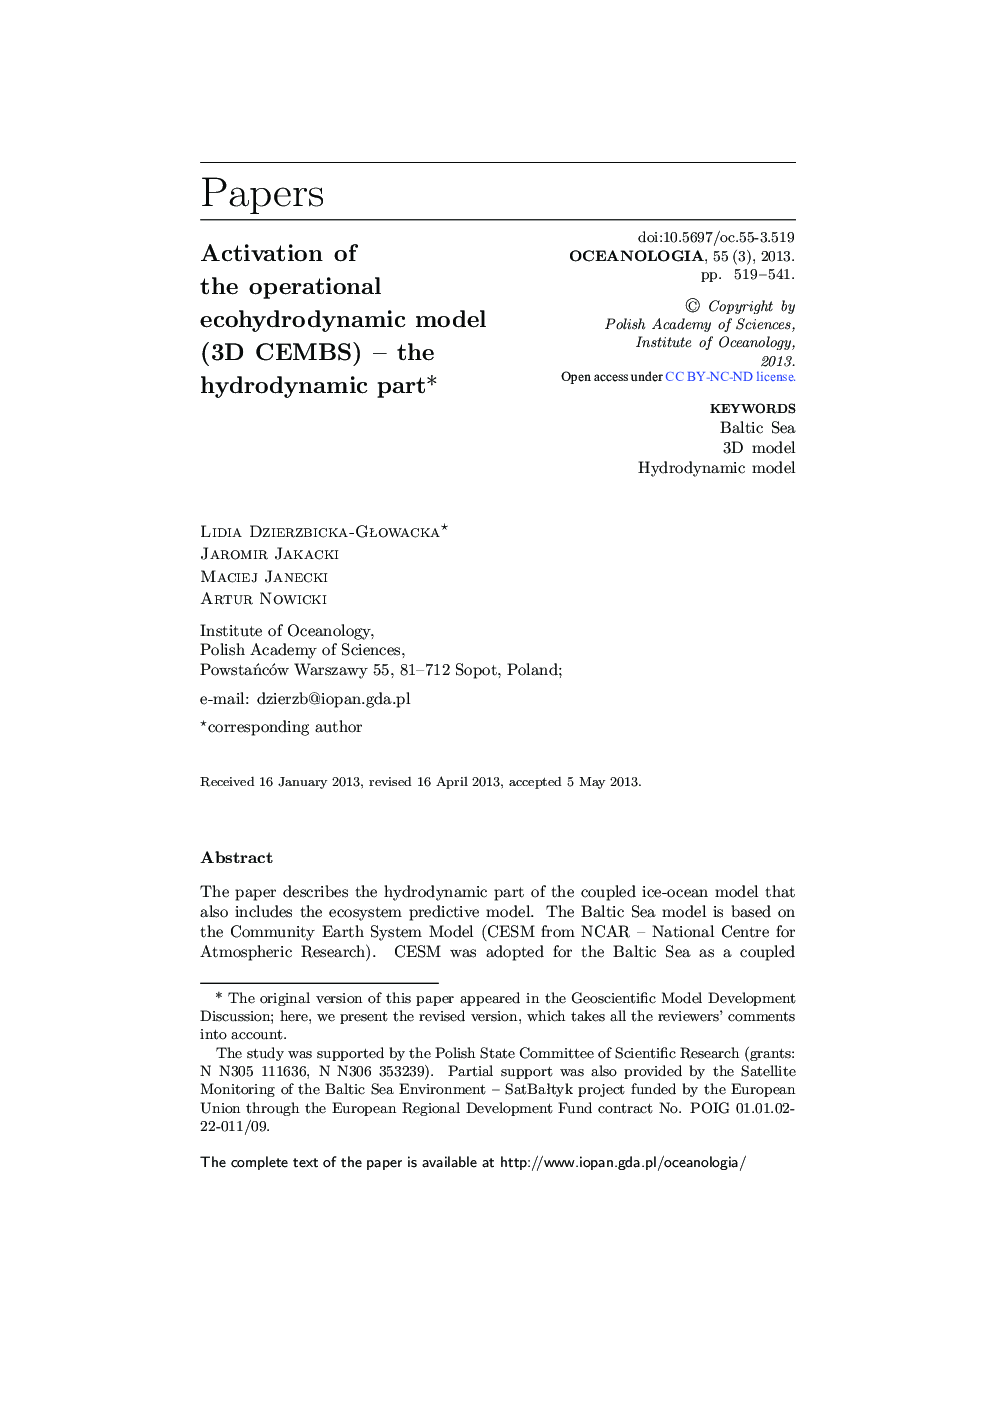 Activation of the operational ecohydrodynamic model (3D CEMBS) – the hydrodynamic part * 